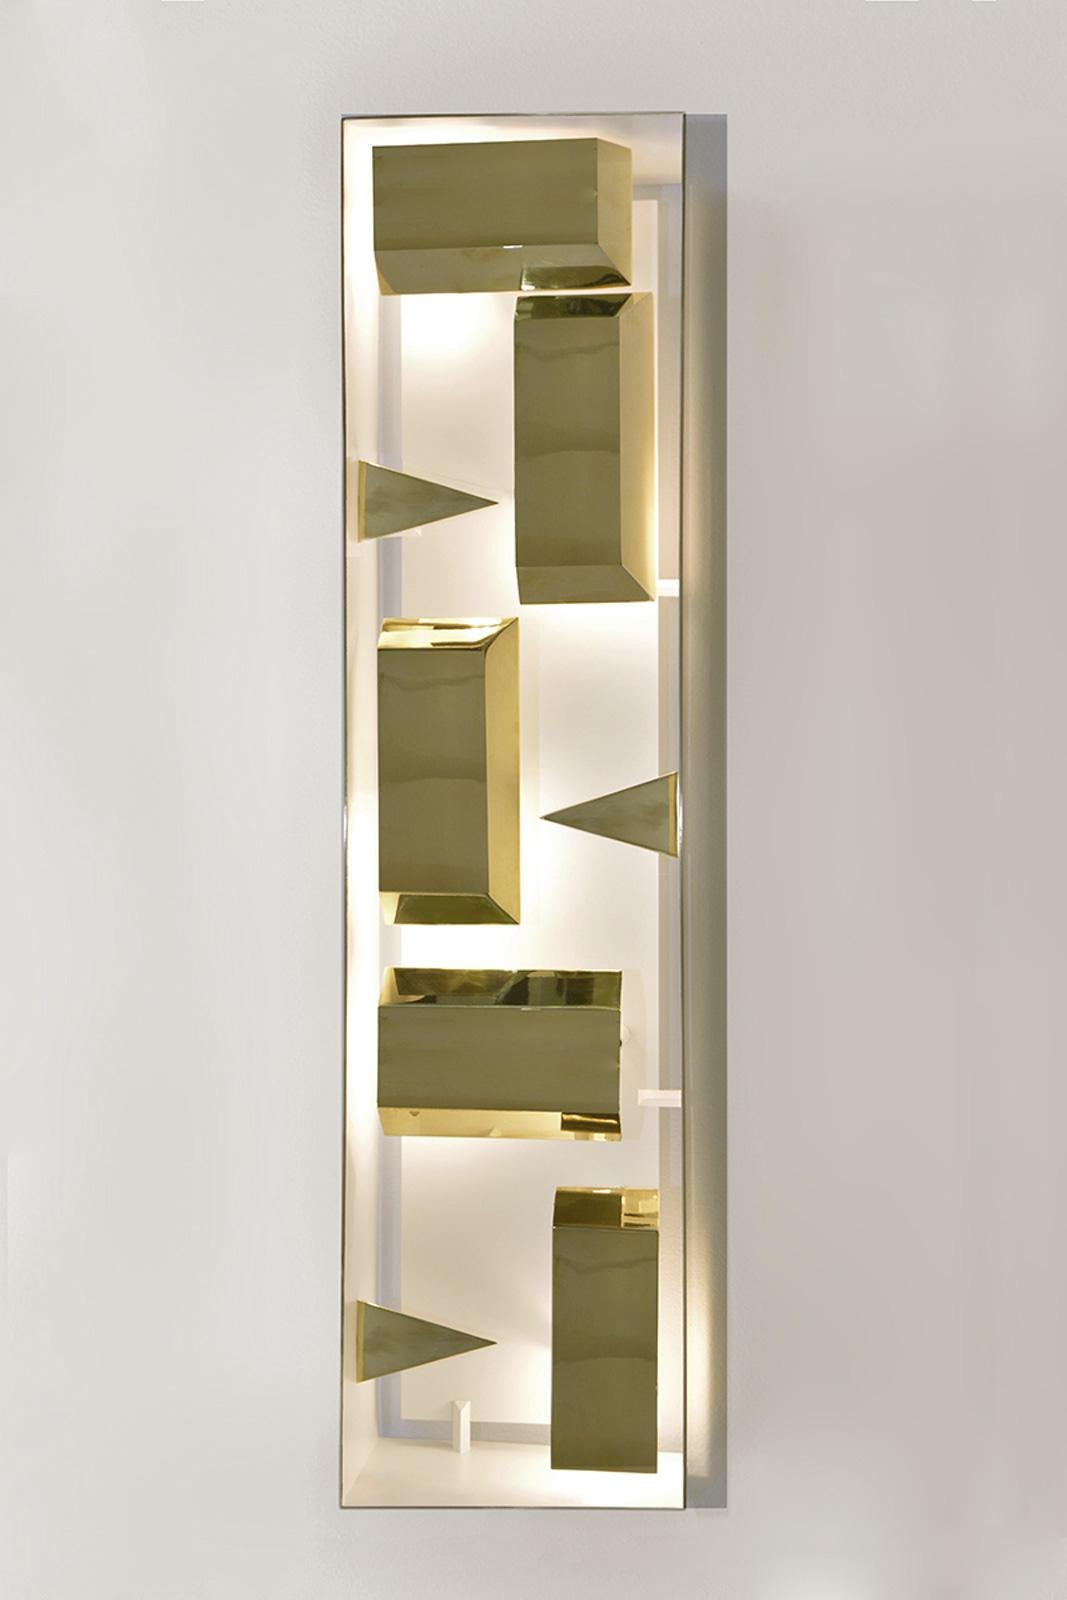 Wall lamp rectangular 'Screen of Light' Gio Ponti Limited Edition 2012 2017 polished brass

Wall sculpture light, wall sconce in polished brass, timeless iconic design. Handcrafted product, realized by Pollice Illuminazione from the original